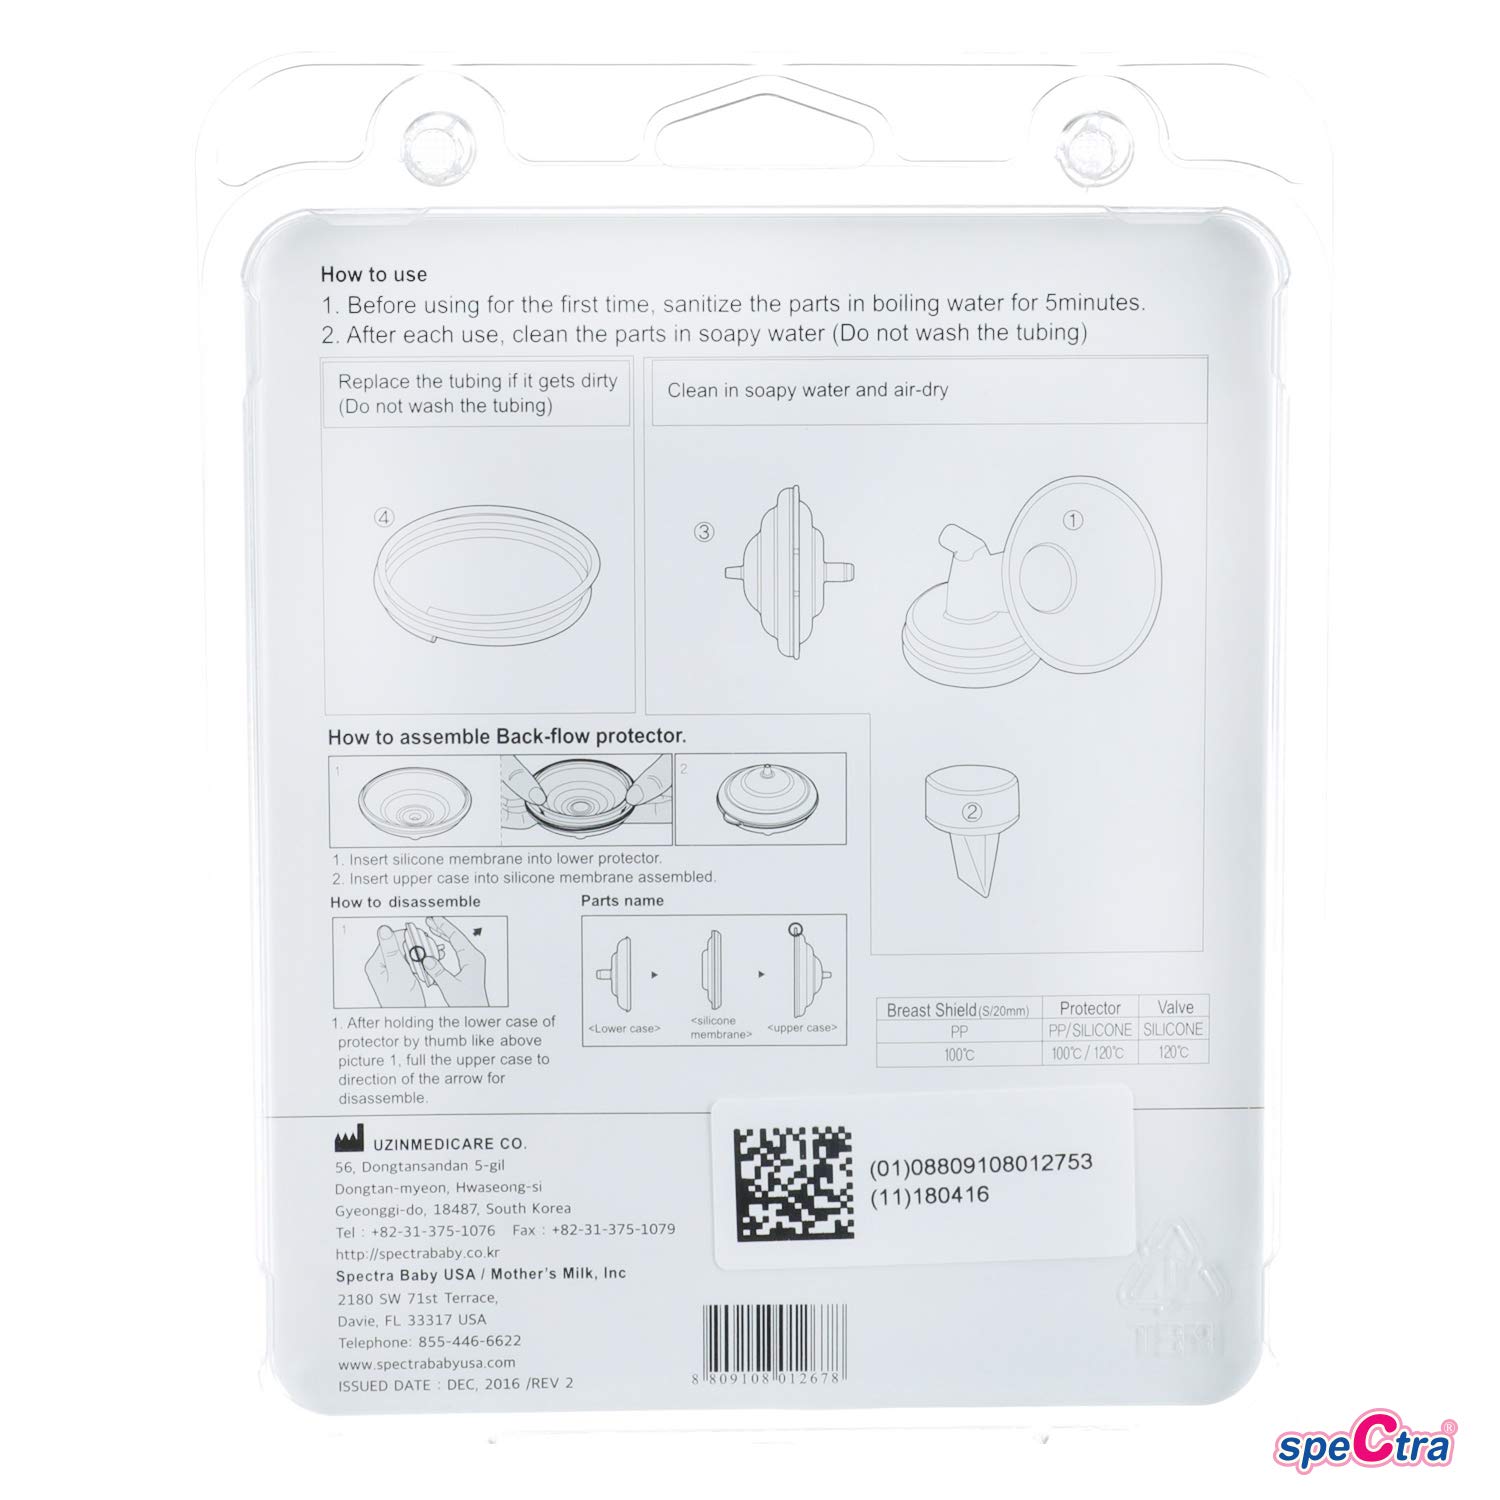 Spectra 20mm Small Breast Shield for 9Plus, S1, S2 and M1 breast